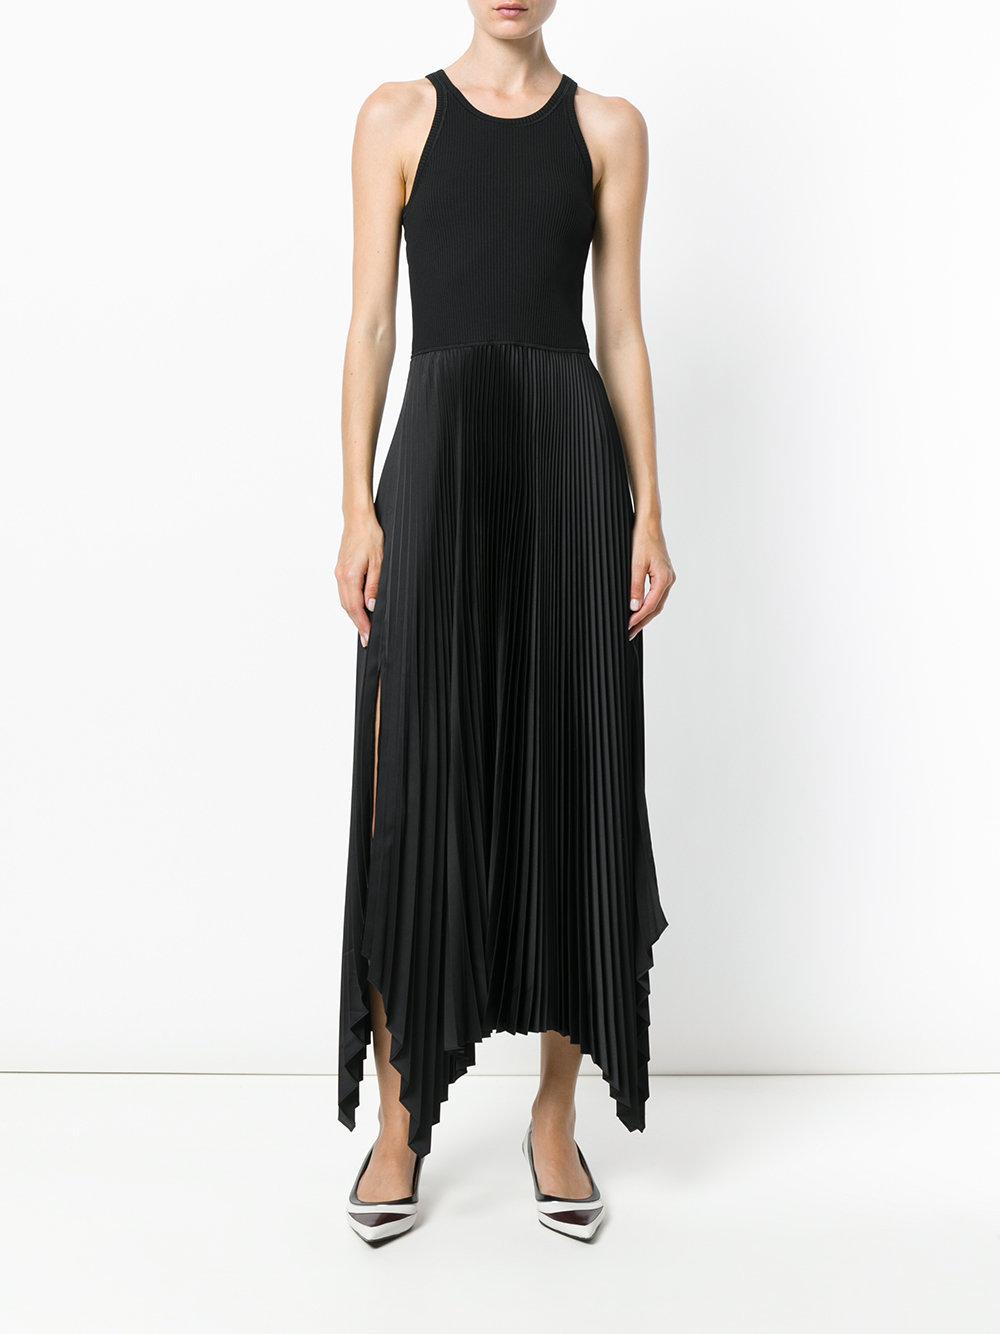 Theory Synthetic Pleated Dress in Black - Lyst